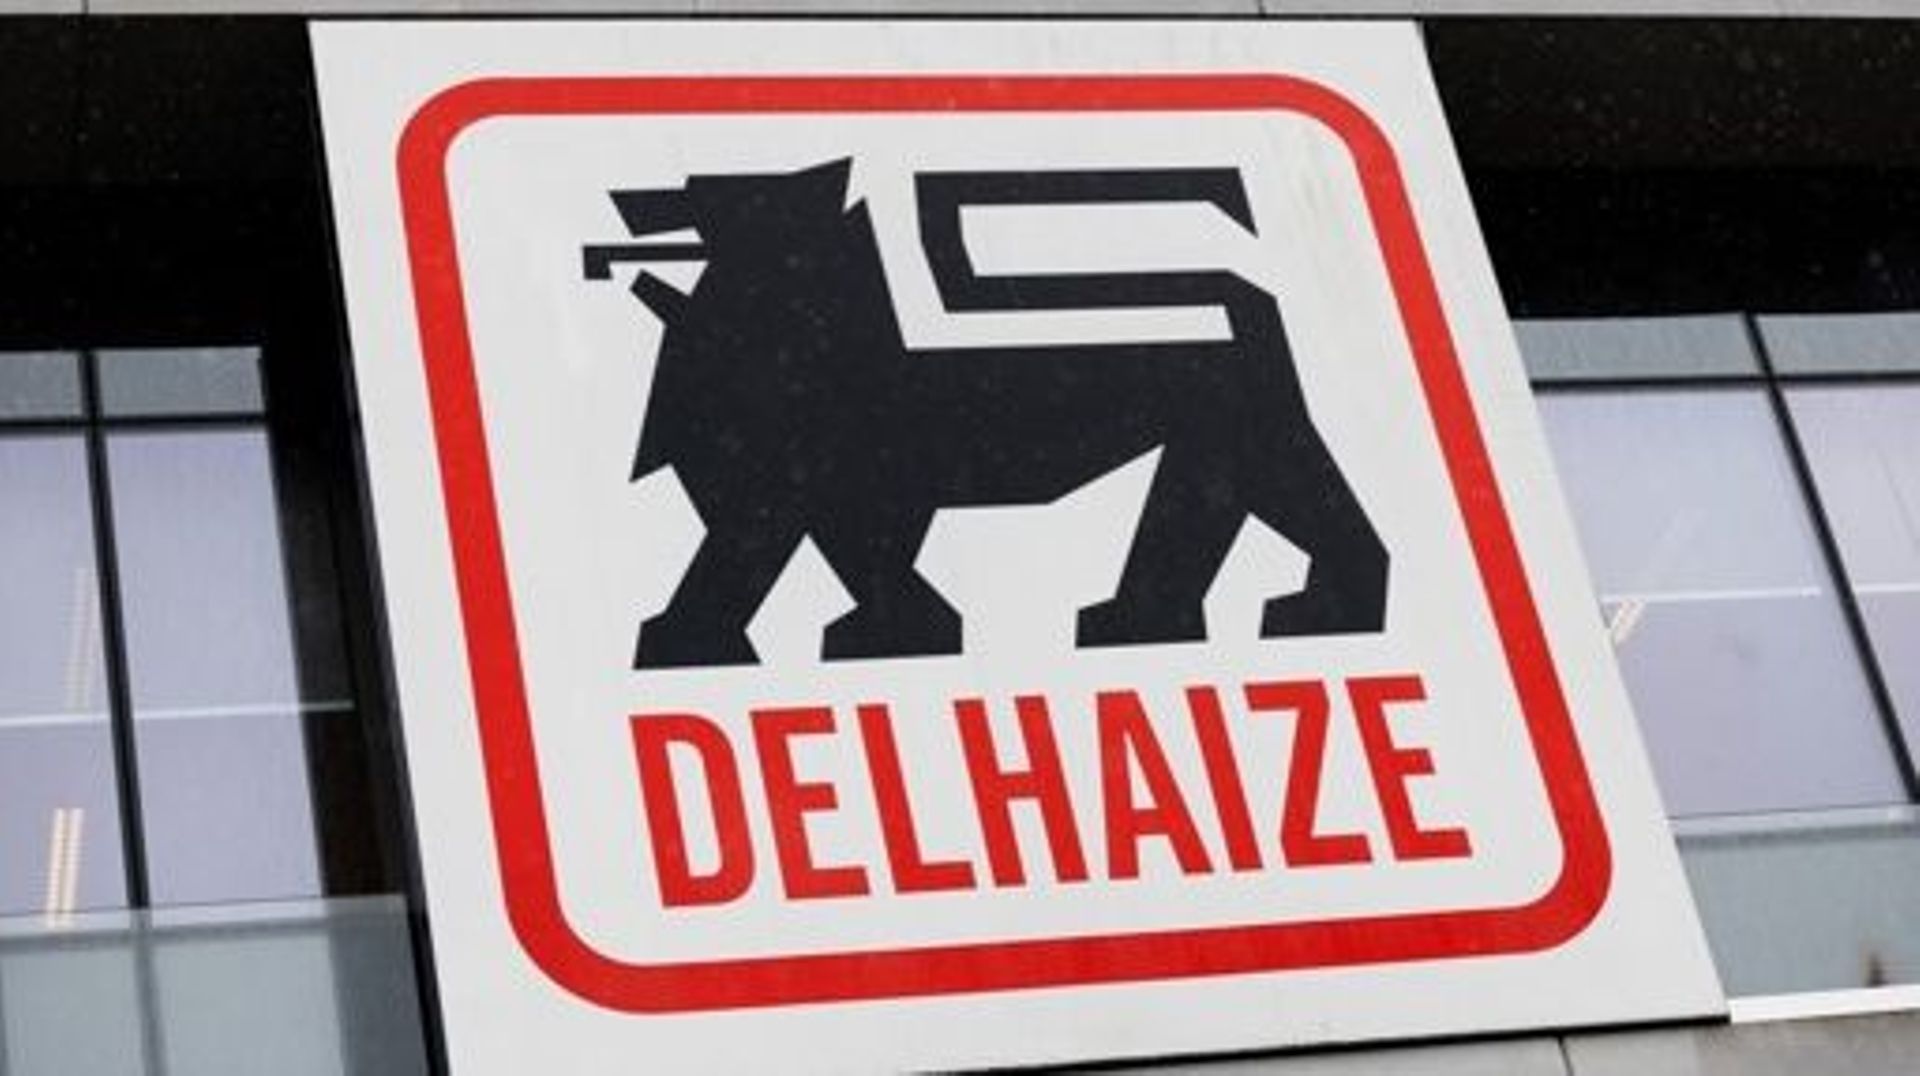 The Delhaize logo pictured during a meeting of the trade unions and direction of supermarket chain Delhaize, in Zellik, Tuesday 14 March 2023. The supermarket chain recently announced its plan to sell their remaining company-owned stores in Belgium, over 